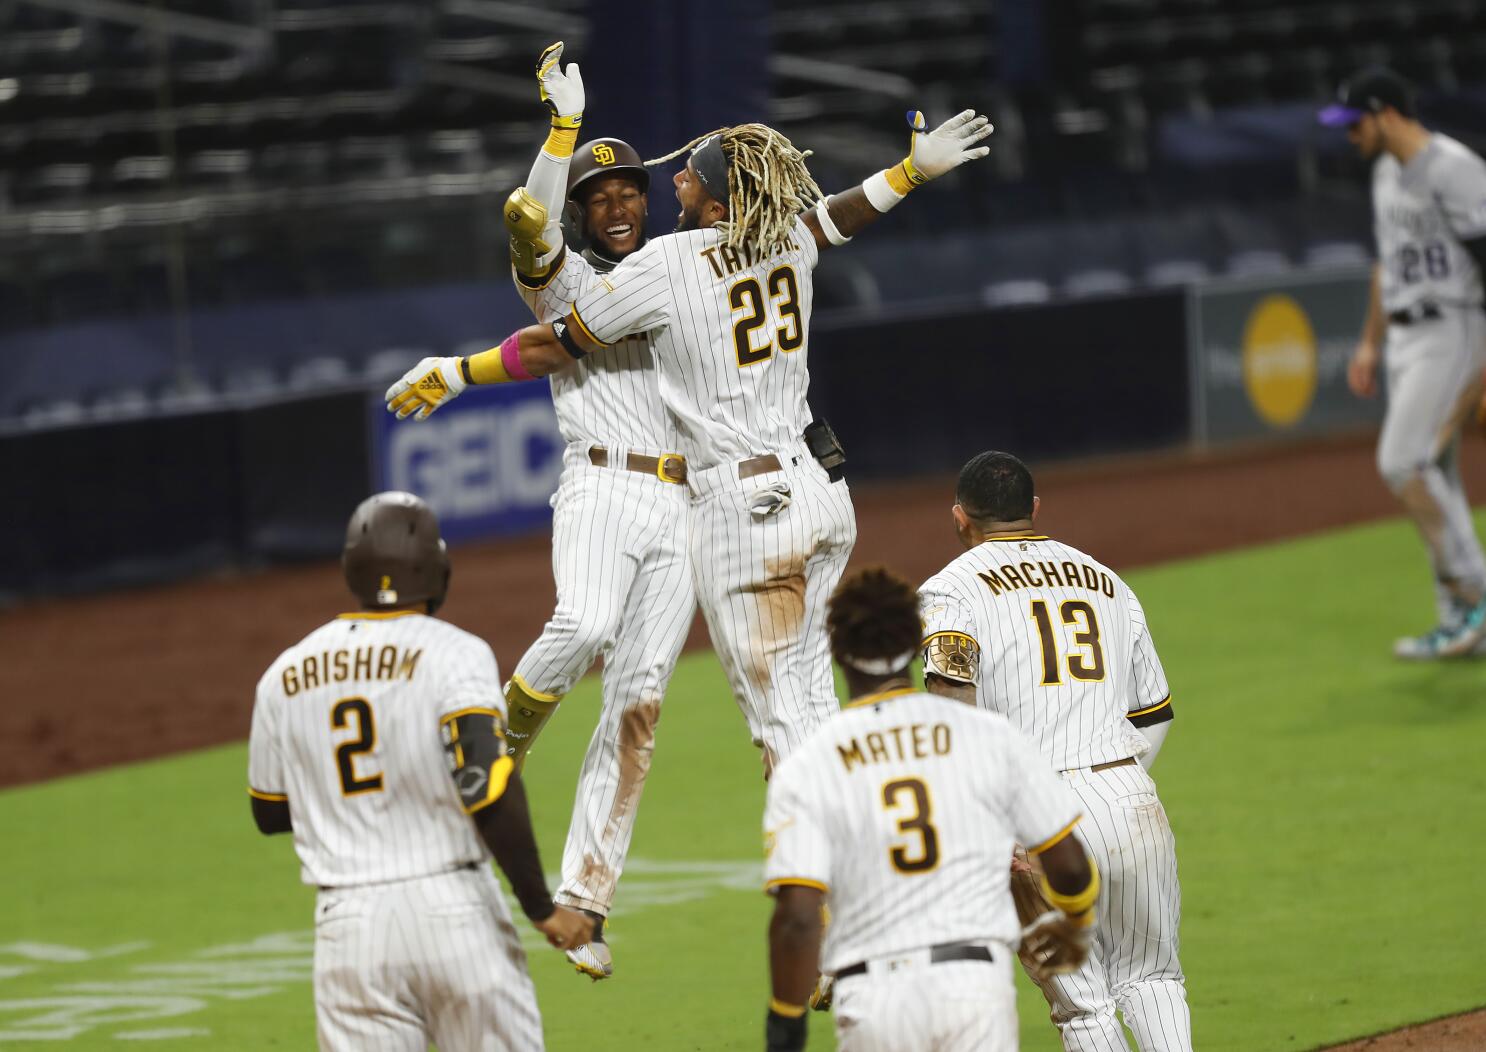 Why it matters that Padres have concocted unique chemistry - The